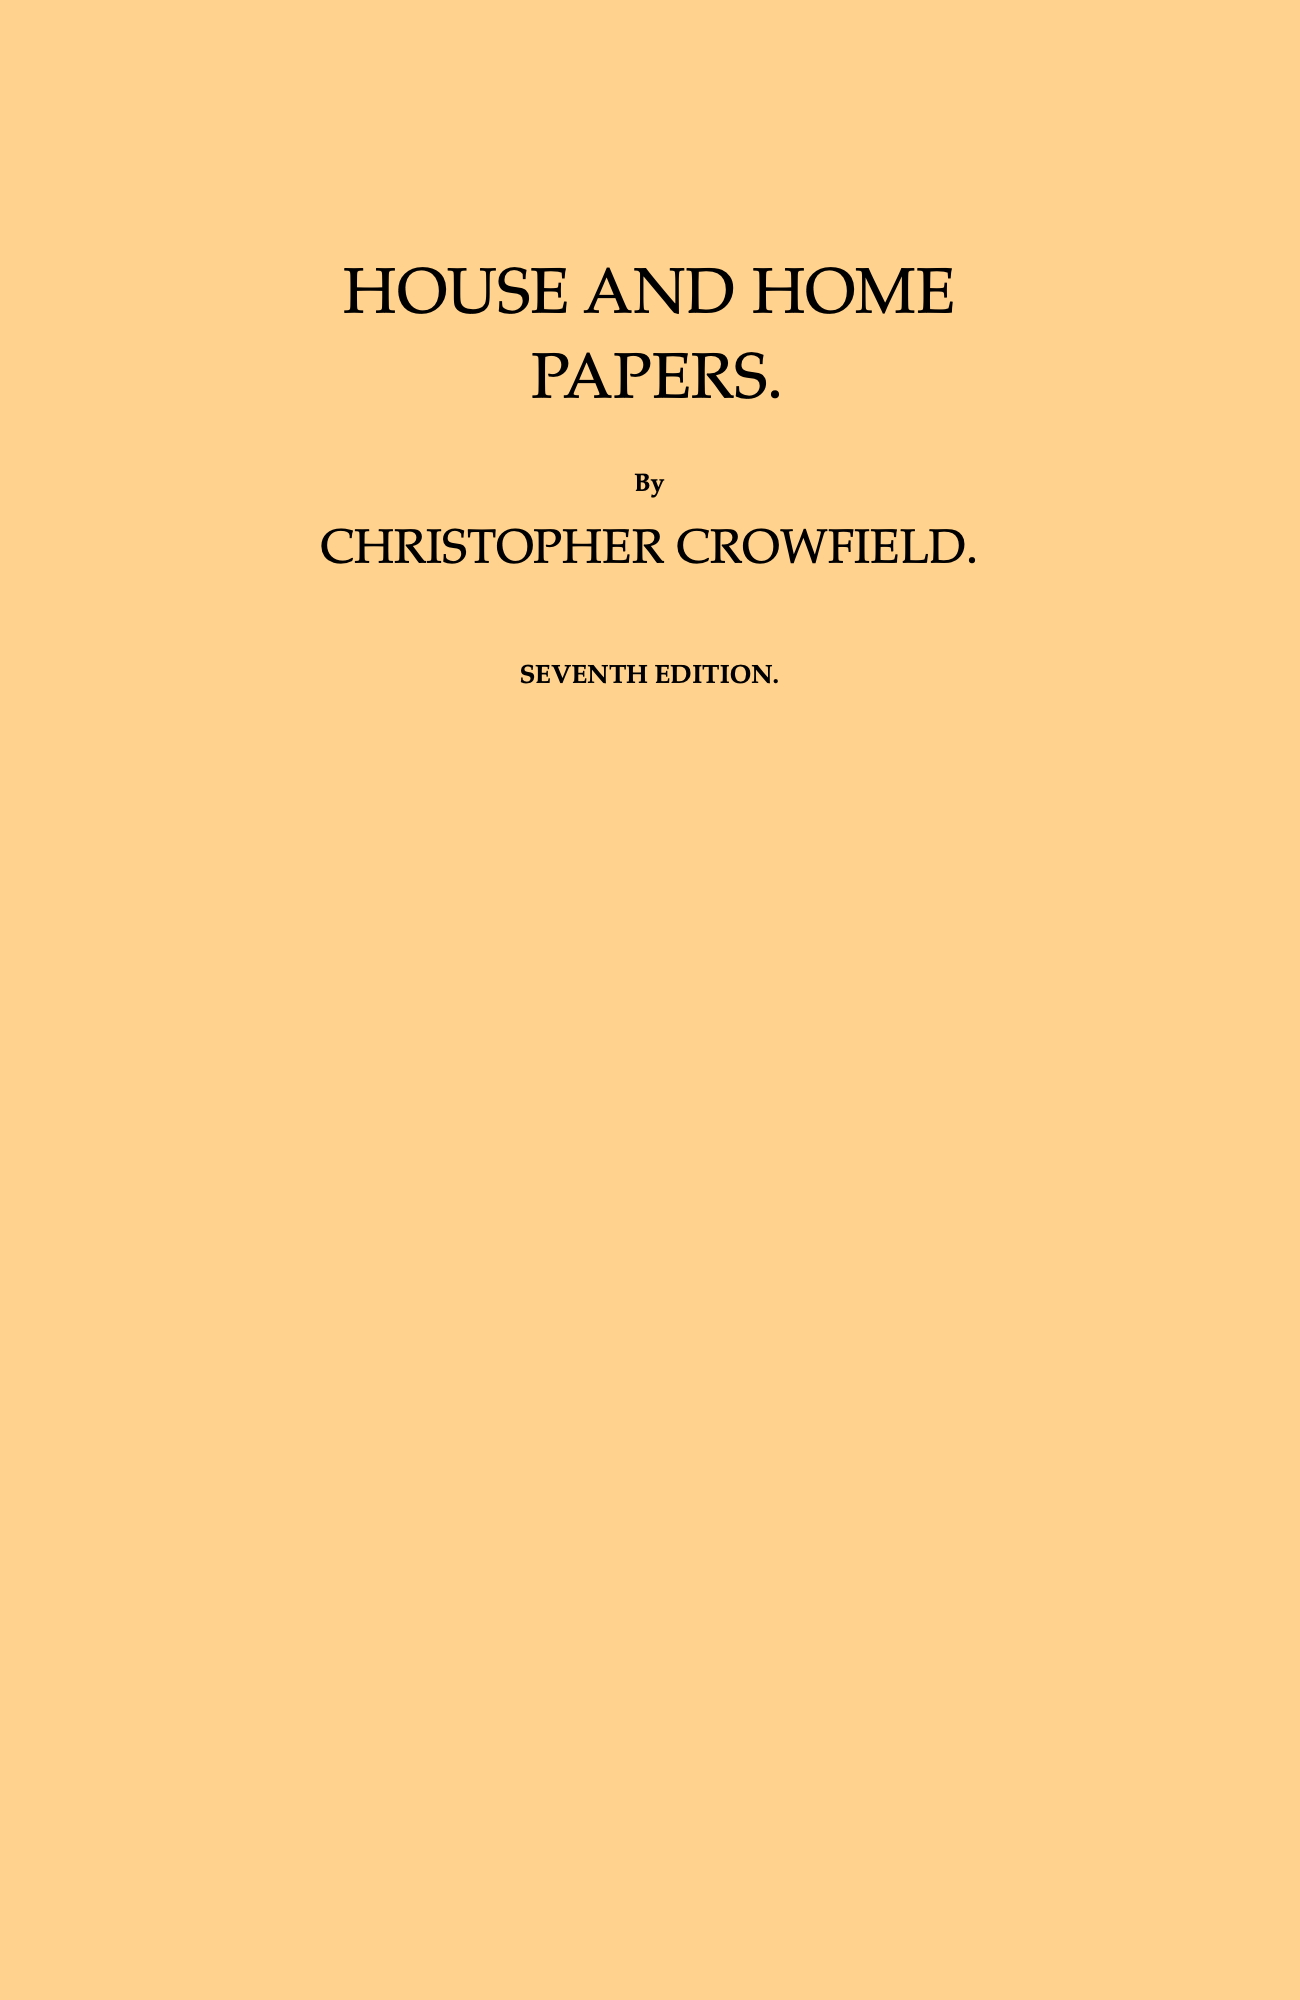 House and Home Papers, by Christopher Crowfield--A Project Gutenberg eBook pic